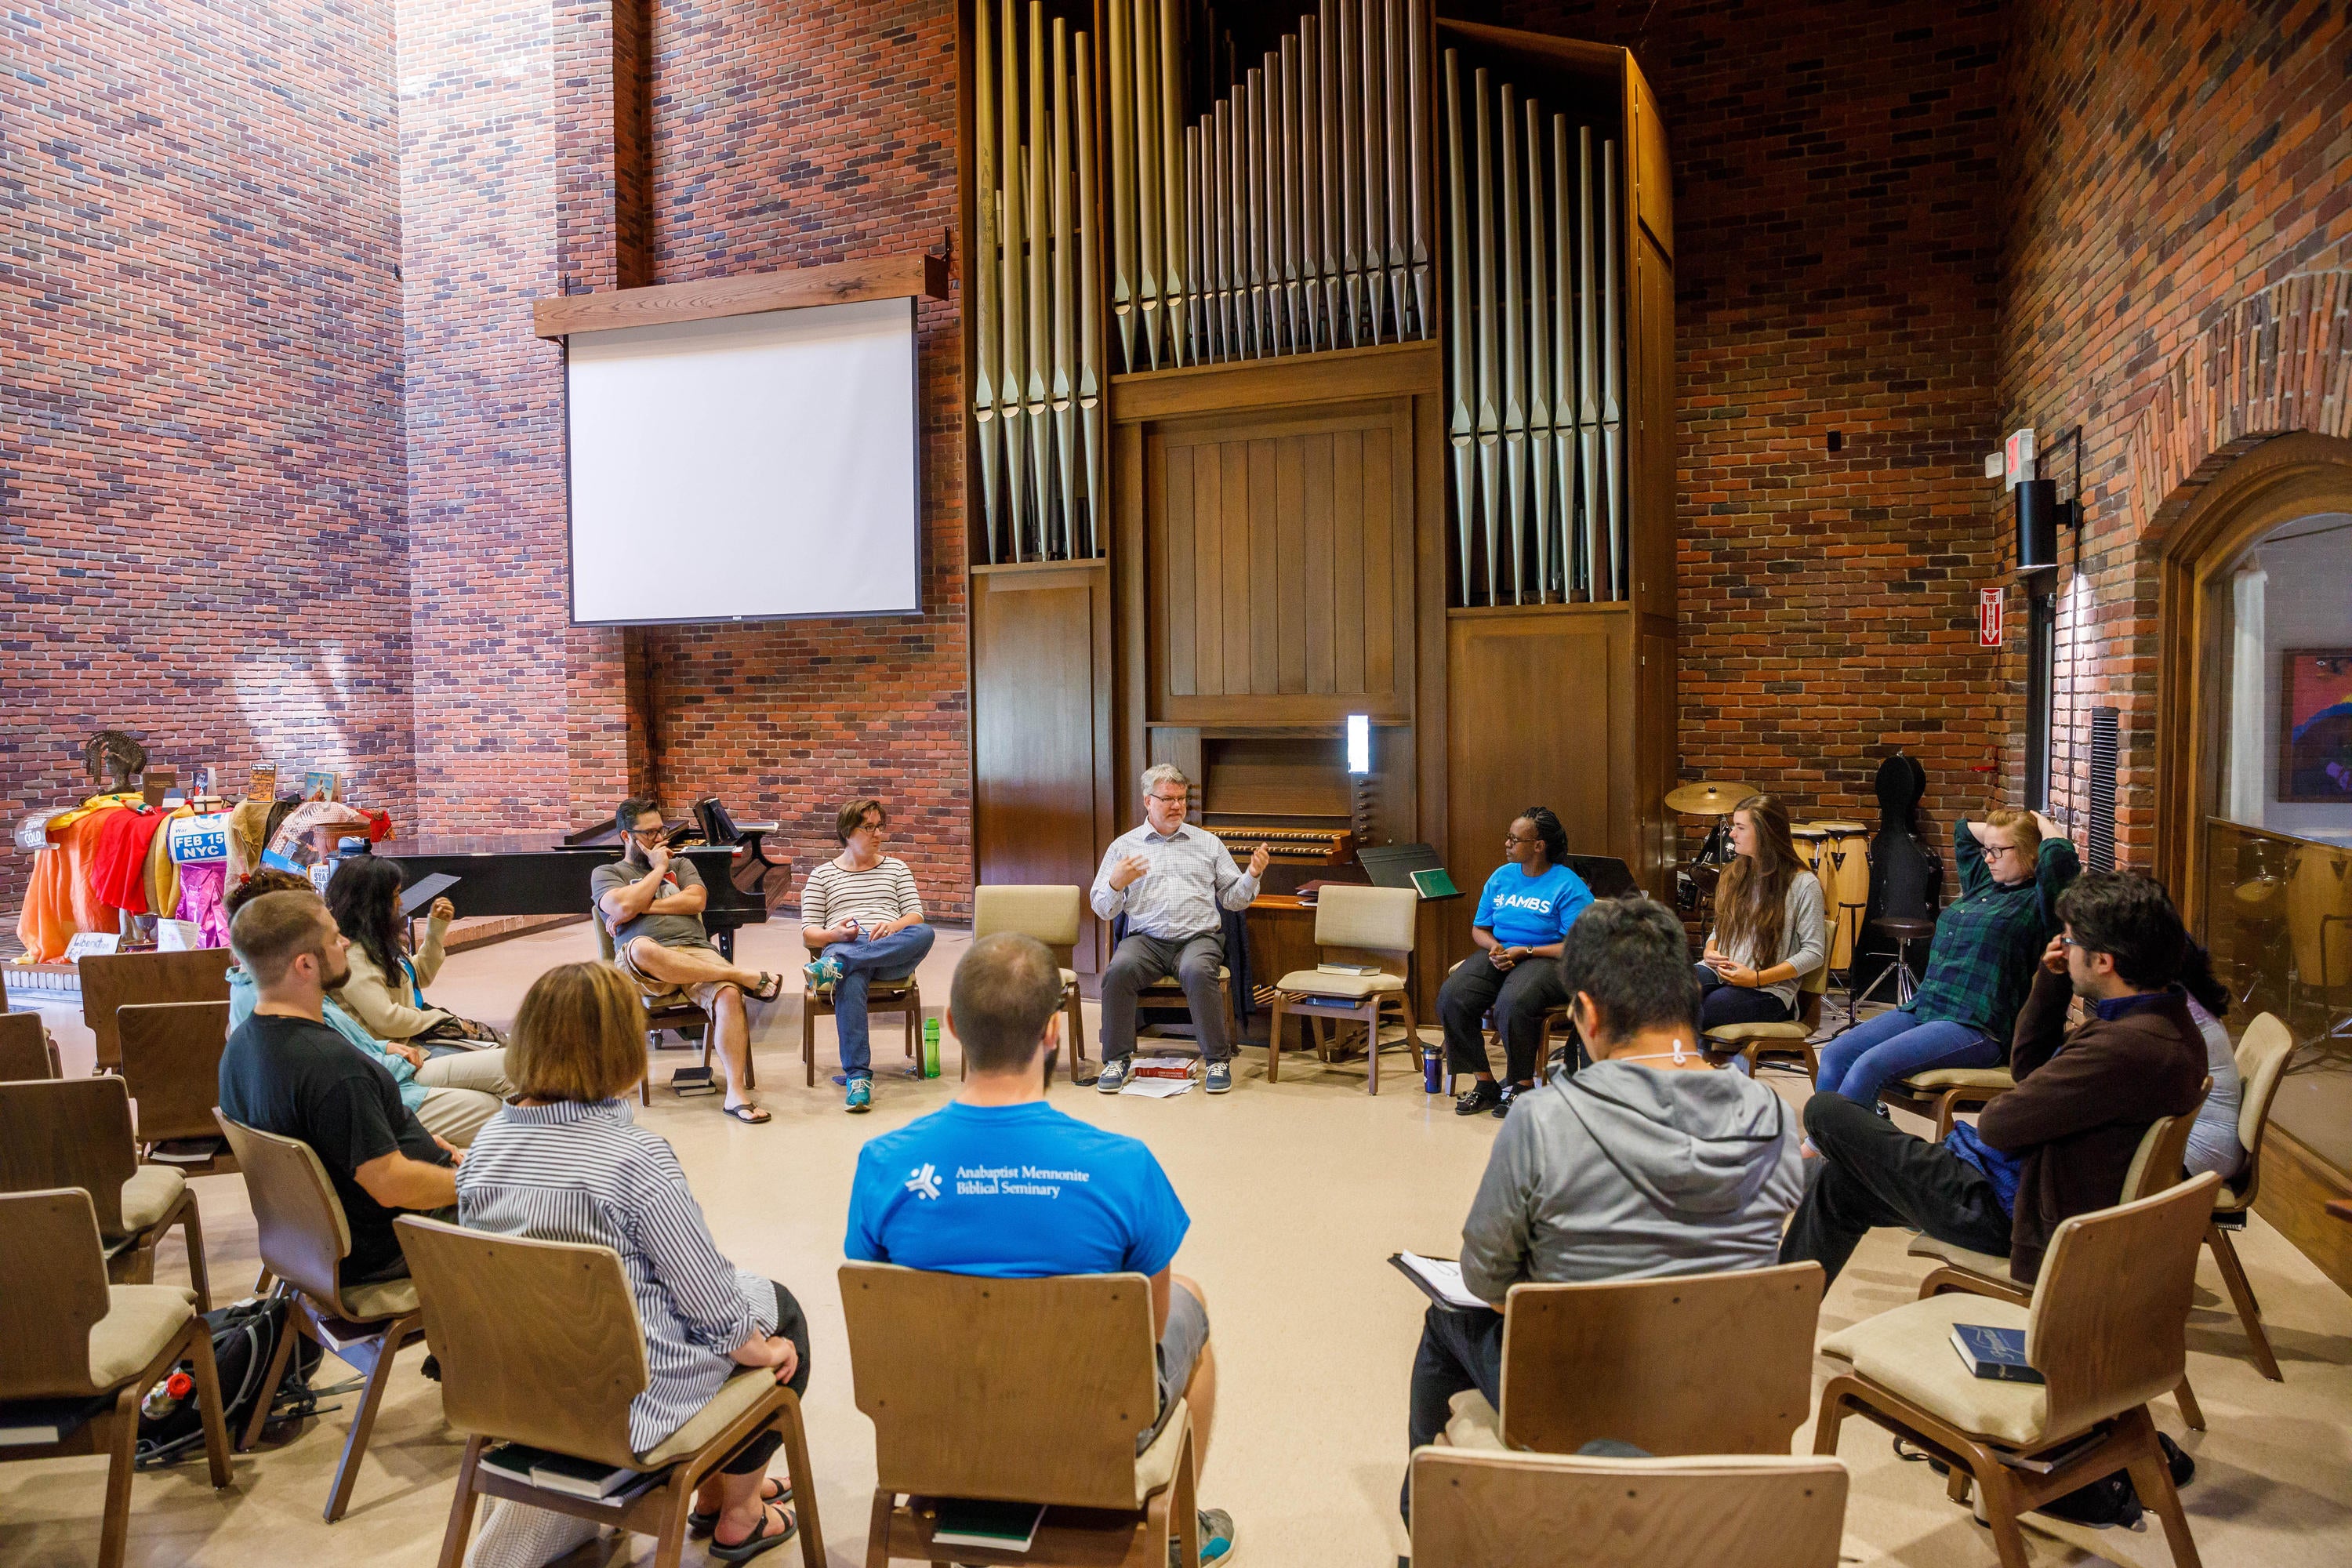 Allan Rudy-Froese, AMBS Associate Professor of Christian Proclamation, leads an orientation session for incoming students in the Chapel of the Sermon on the Mount in August 2017. (Credit: Peter Ringenberg)